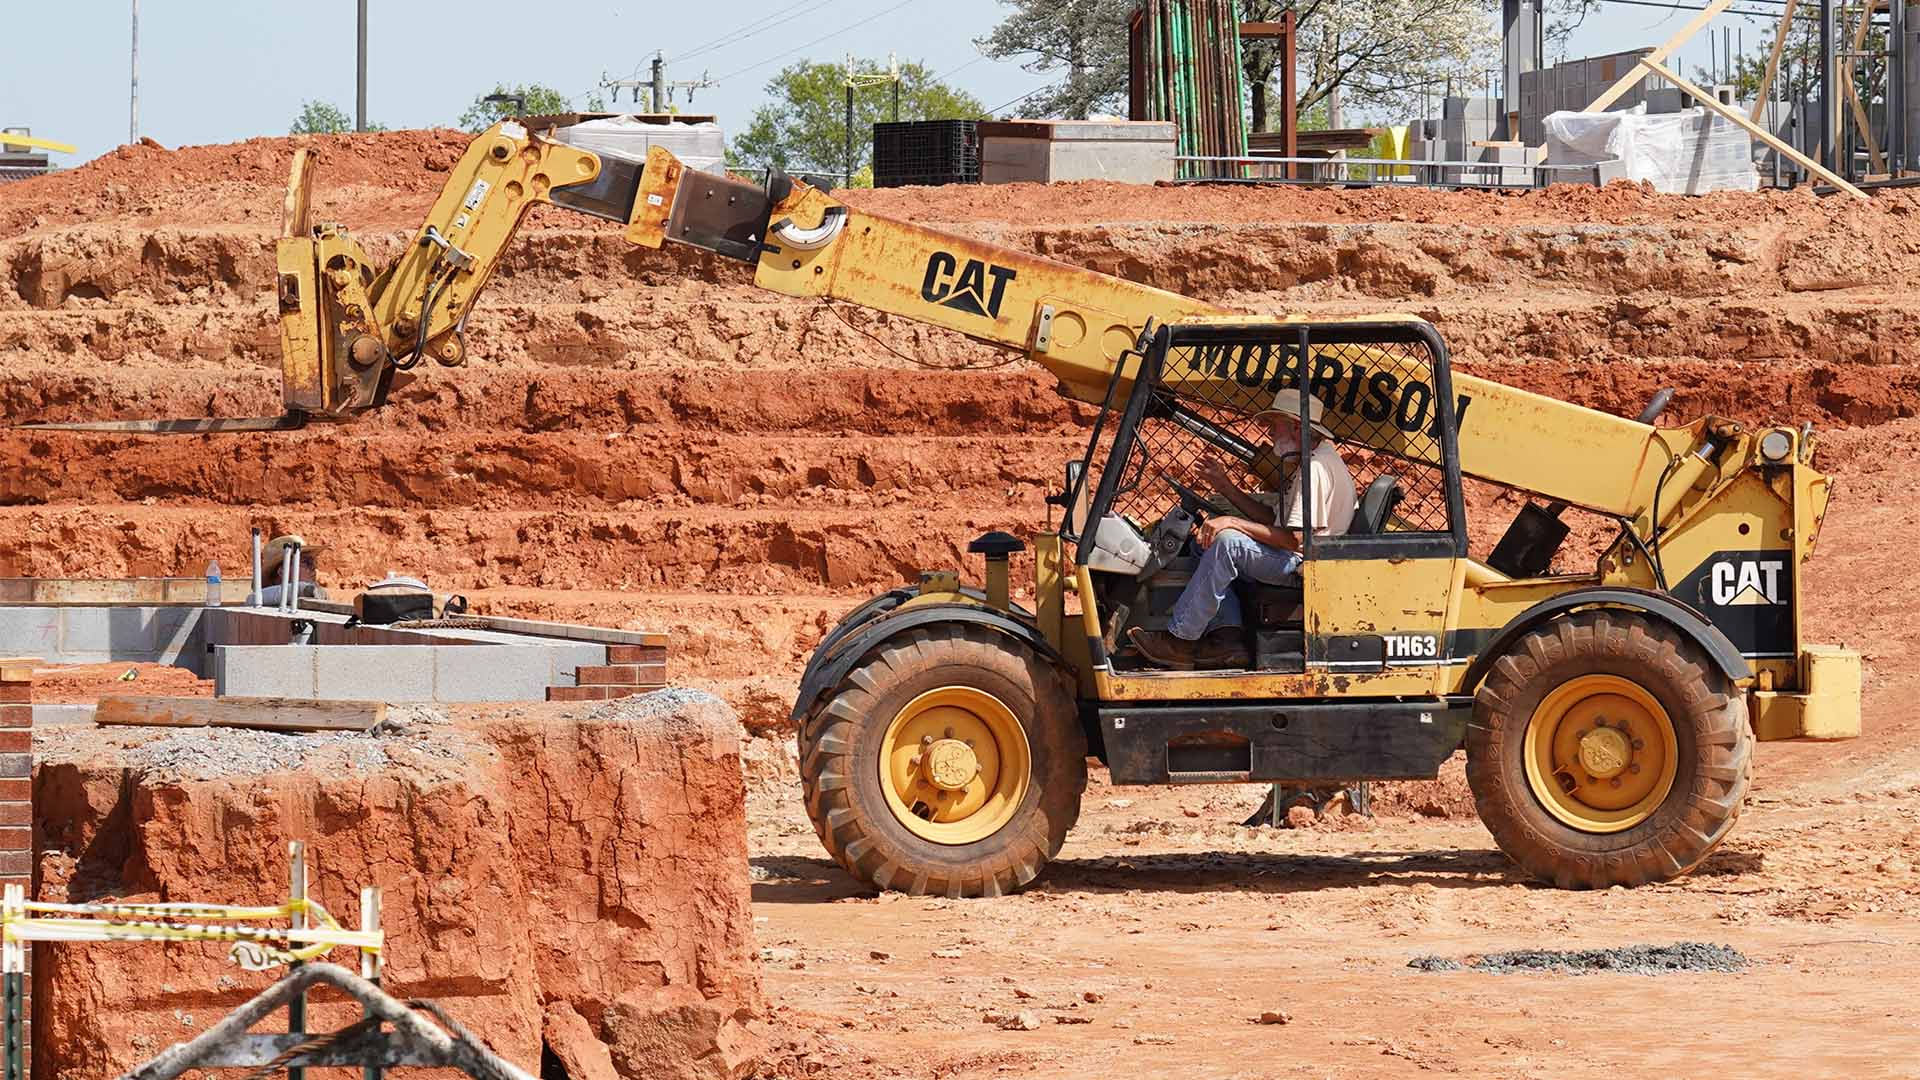 construction at brinkley amphitheater site